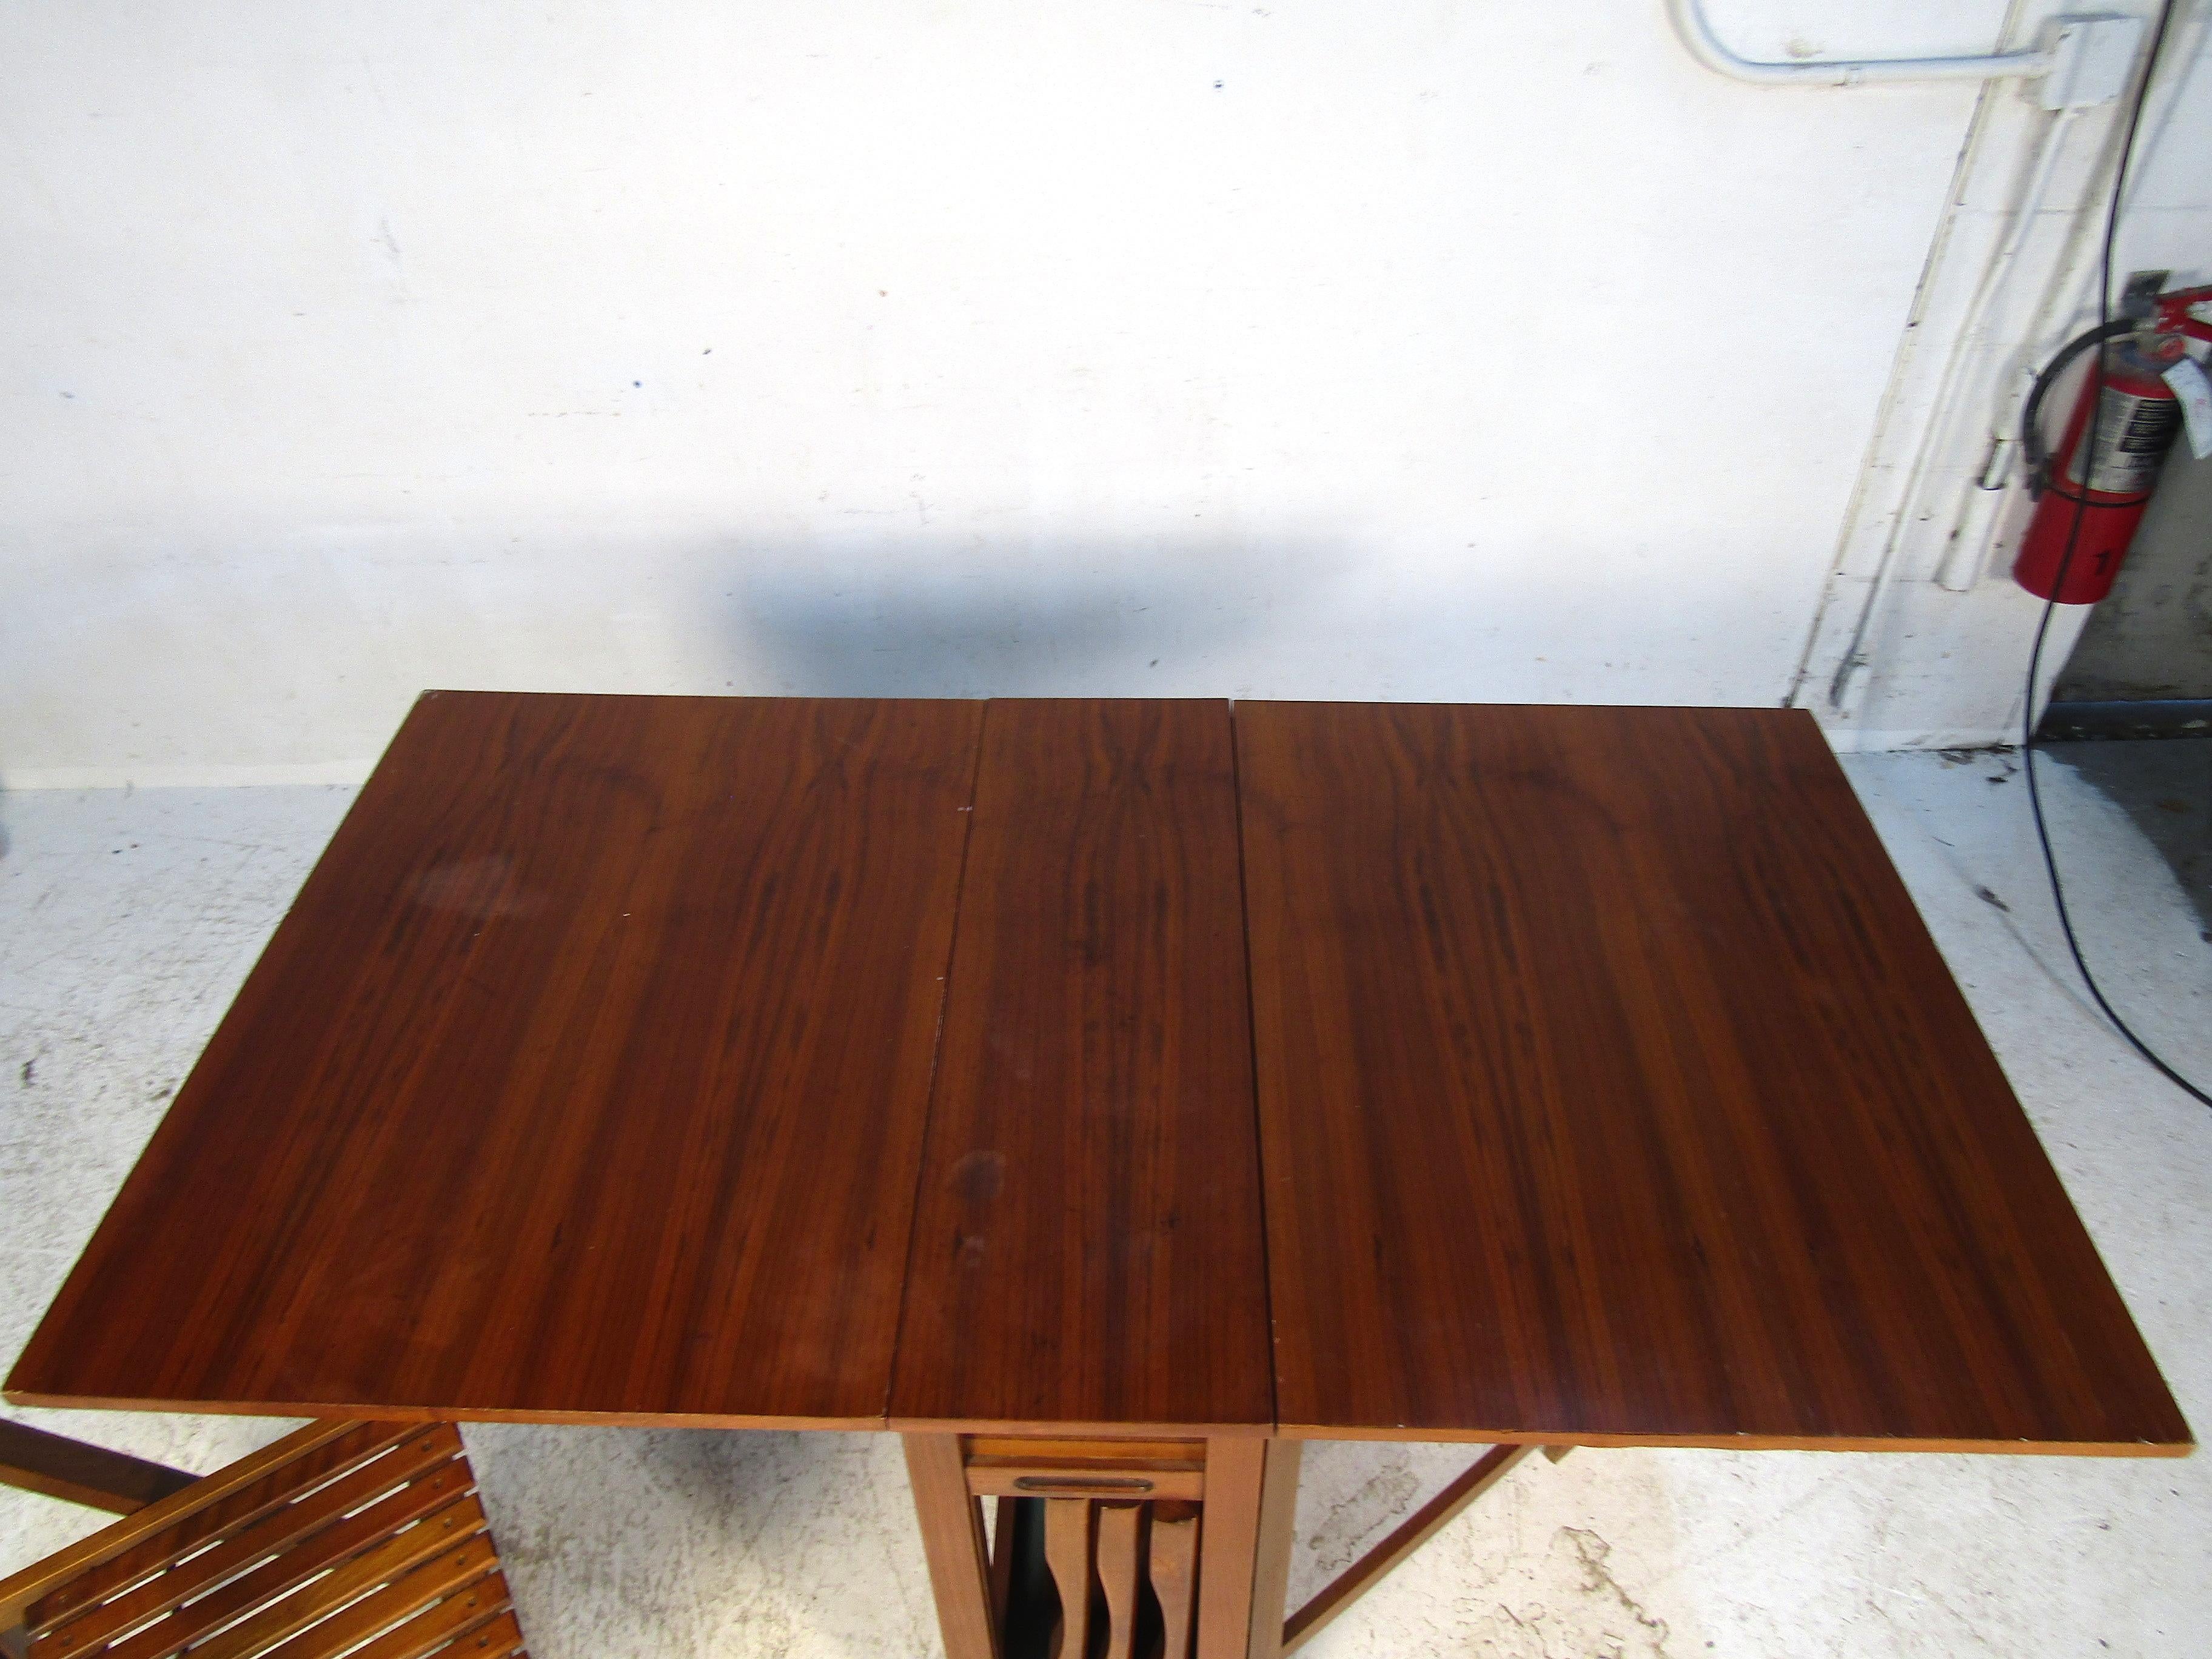 Teak Midcentury Drop-Leaf Table with Storable Matching Chairs